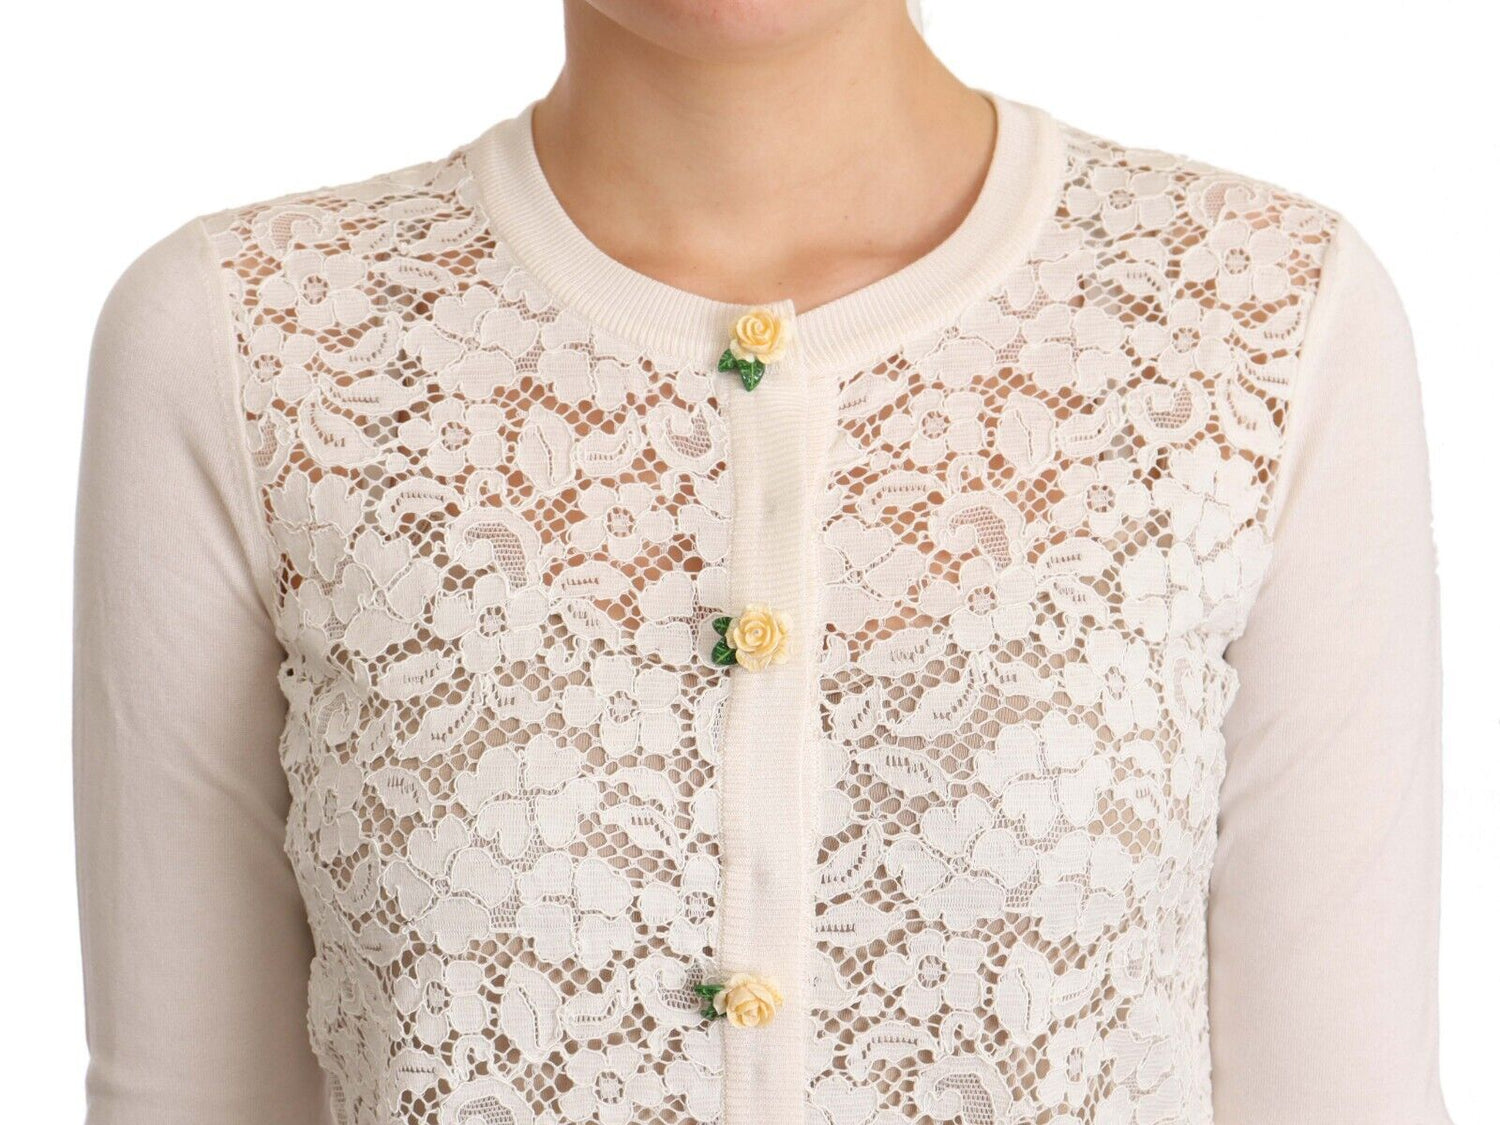 White Floral Lace Silk Cardigan  Sweater